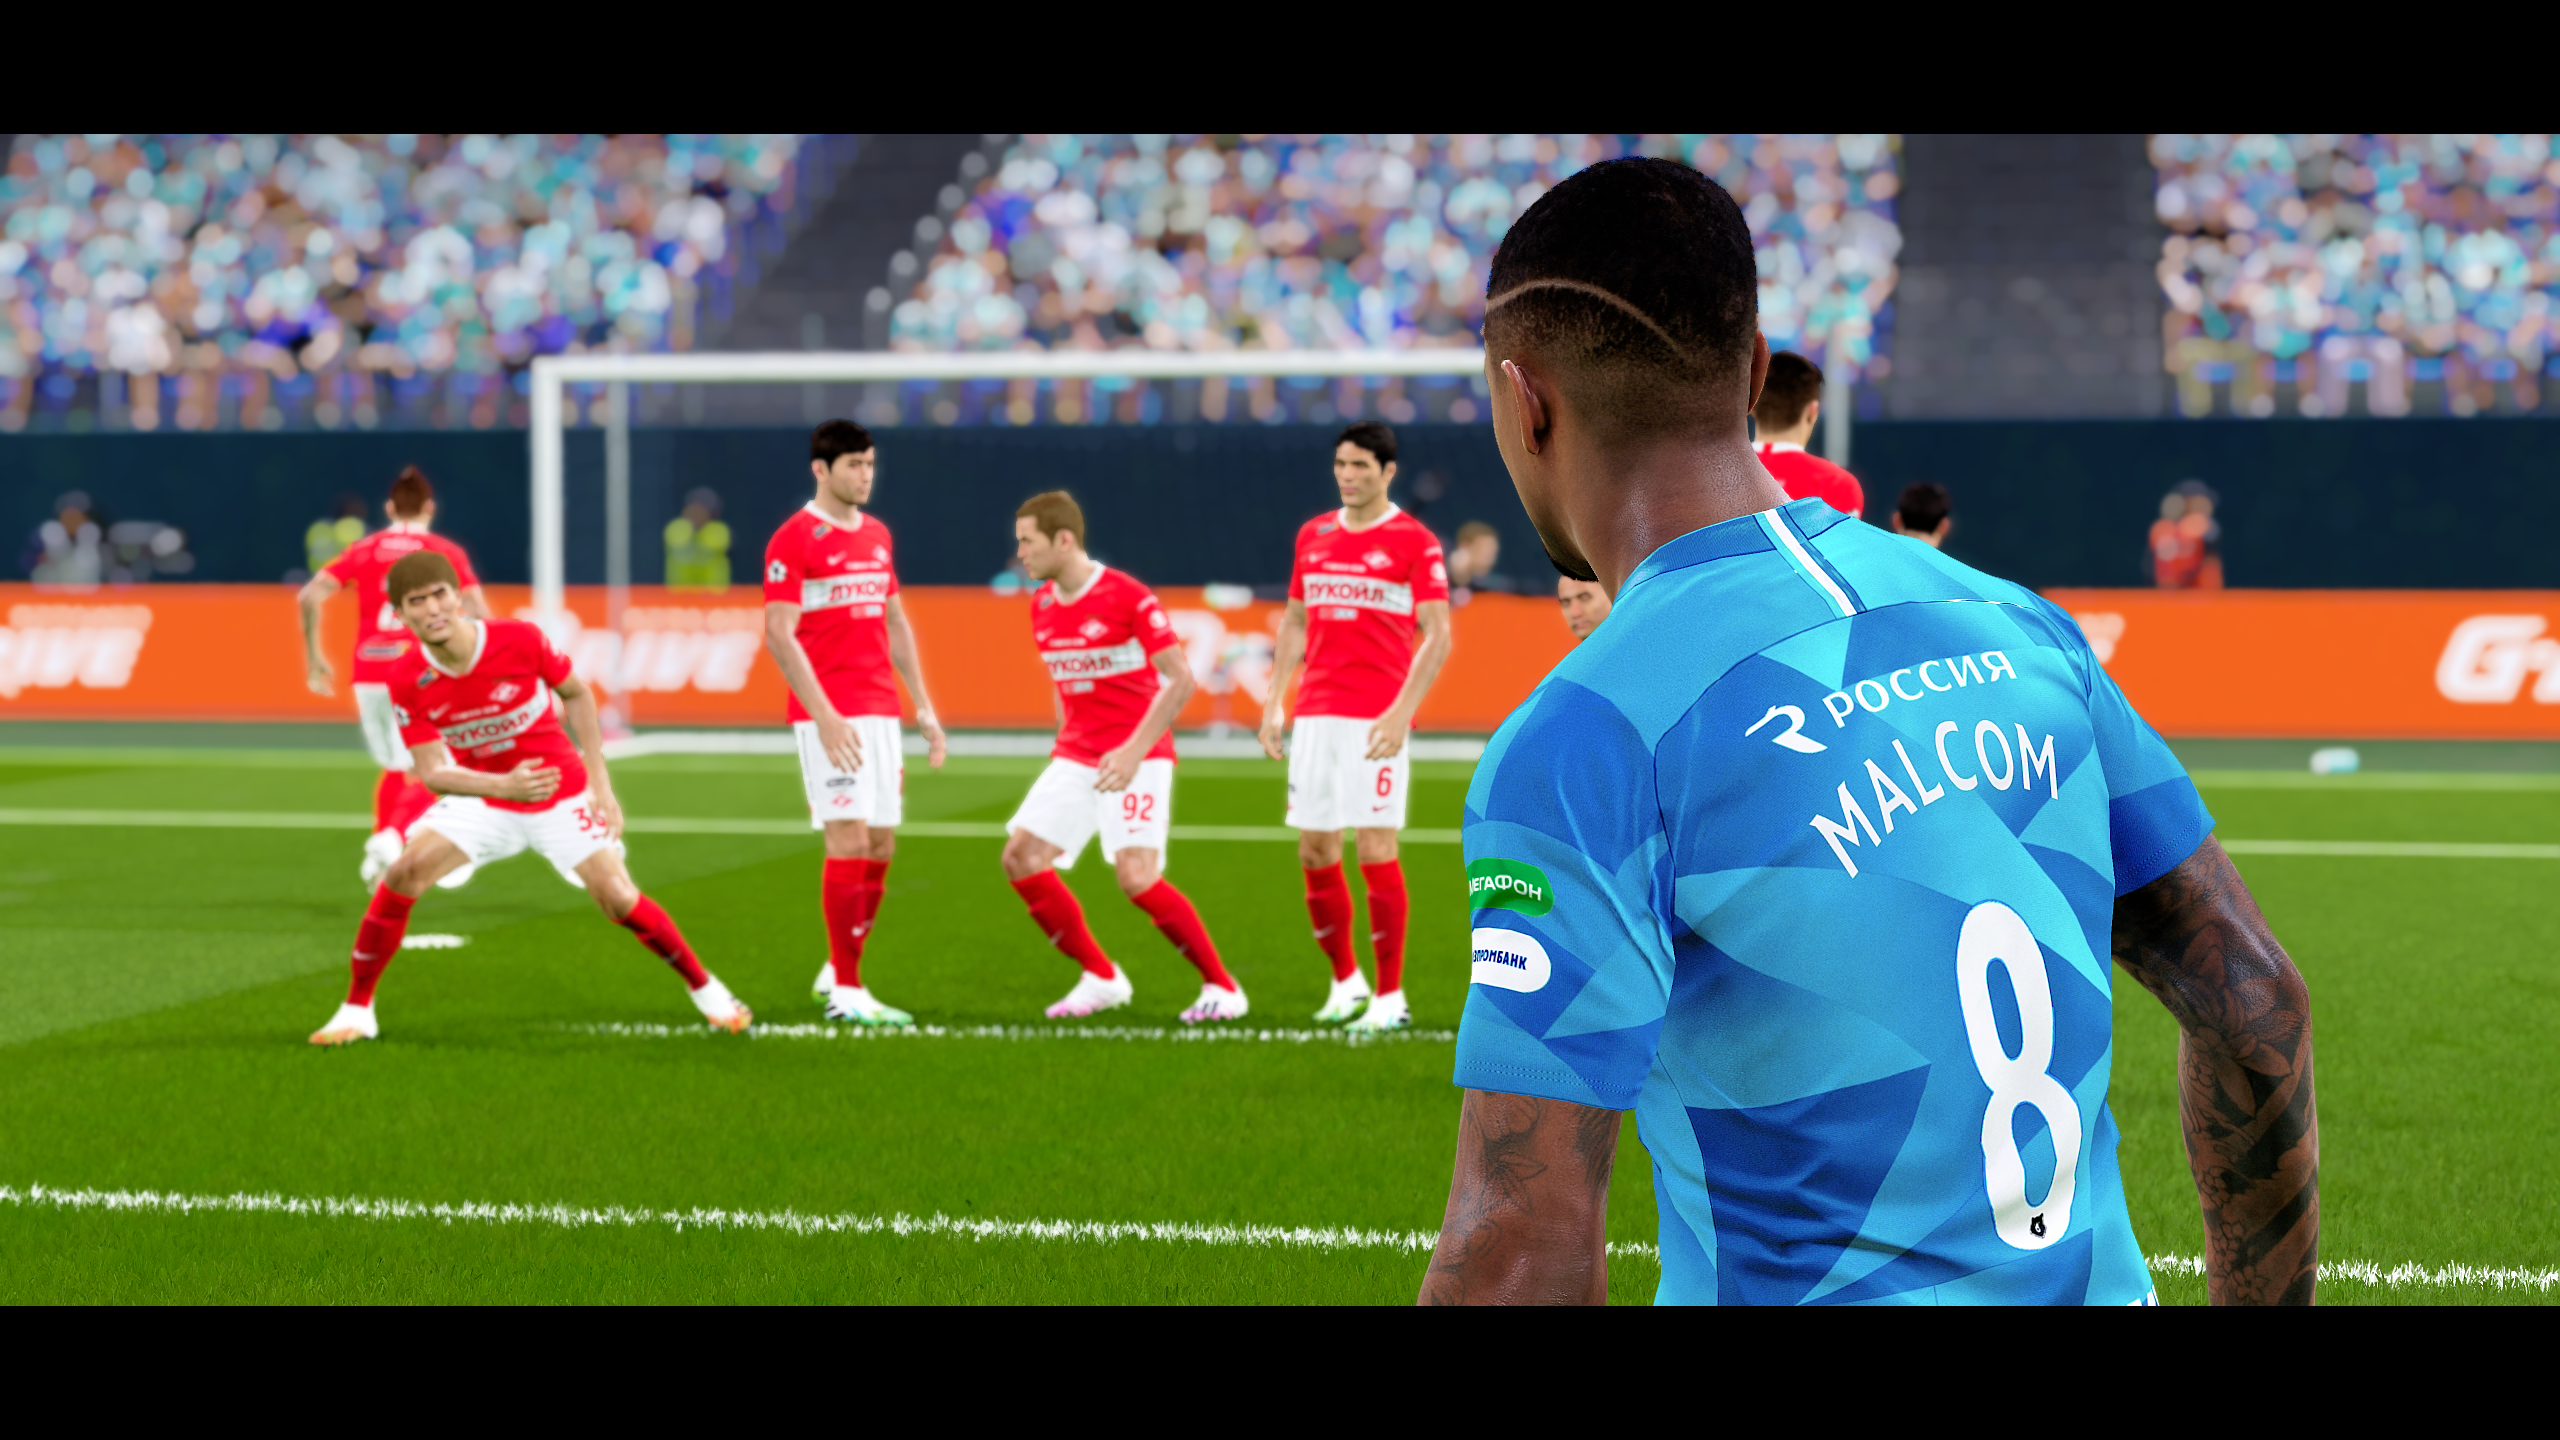 v-gry-steamapps-common-efootball-pes-2020-pes2020-exe-Screenshot-2020-06-12-01-12-06-32.png